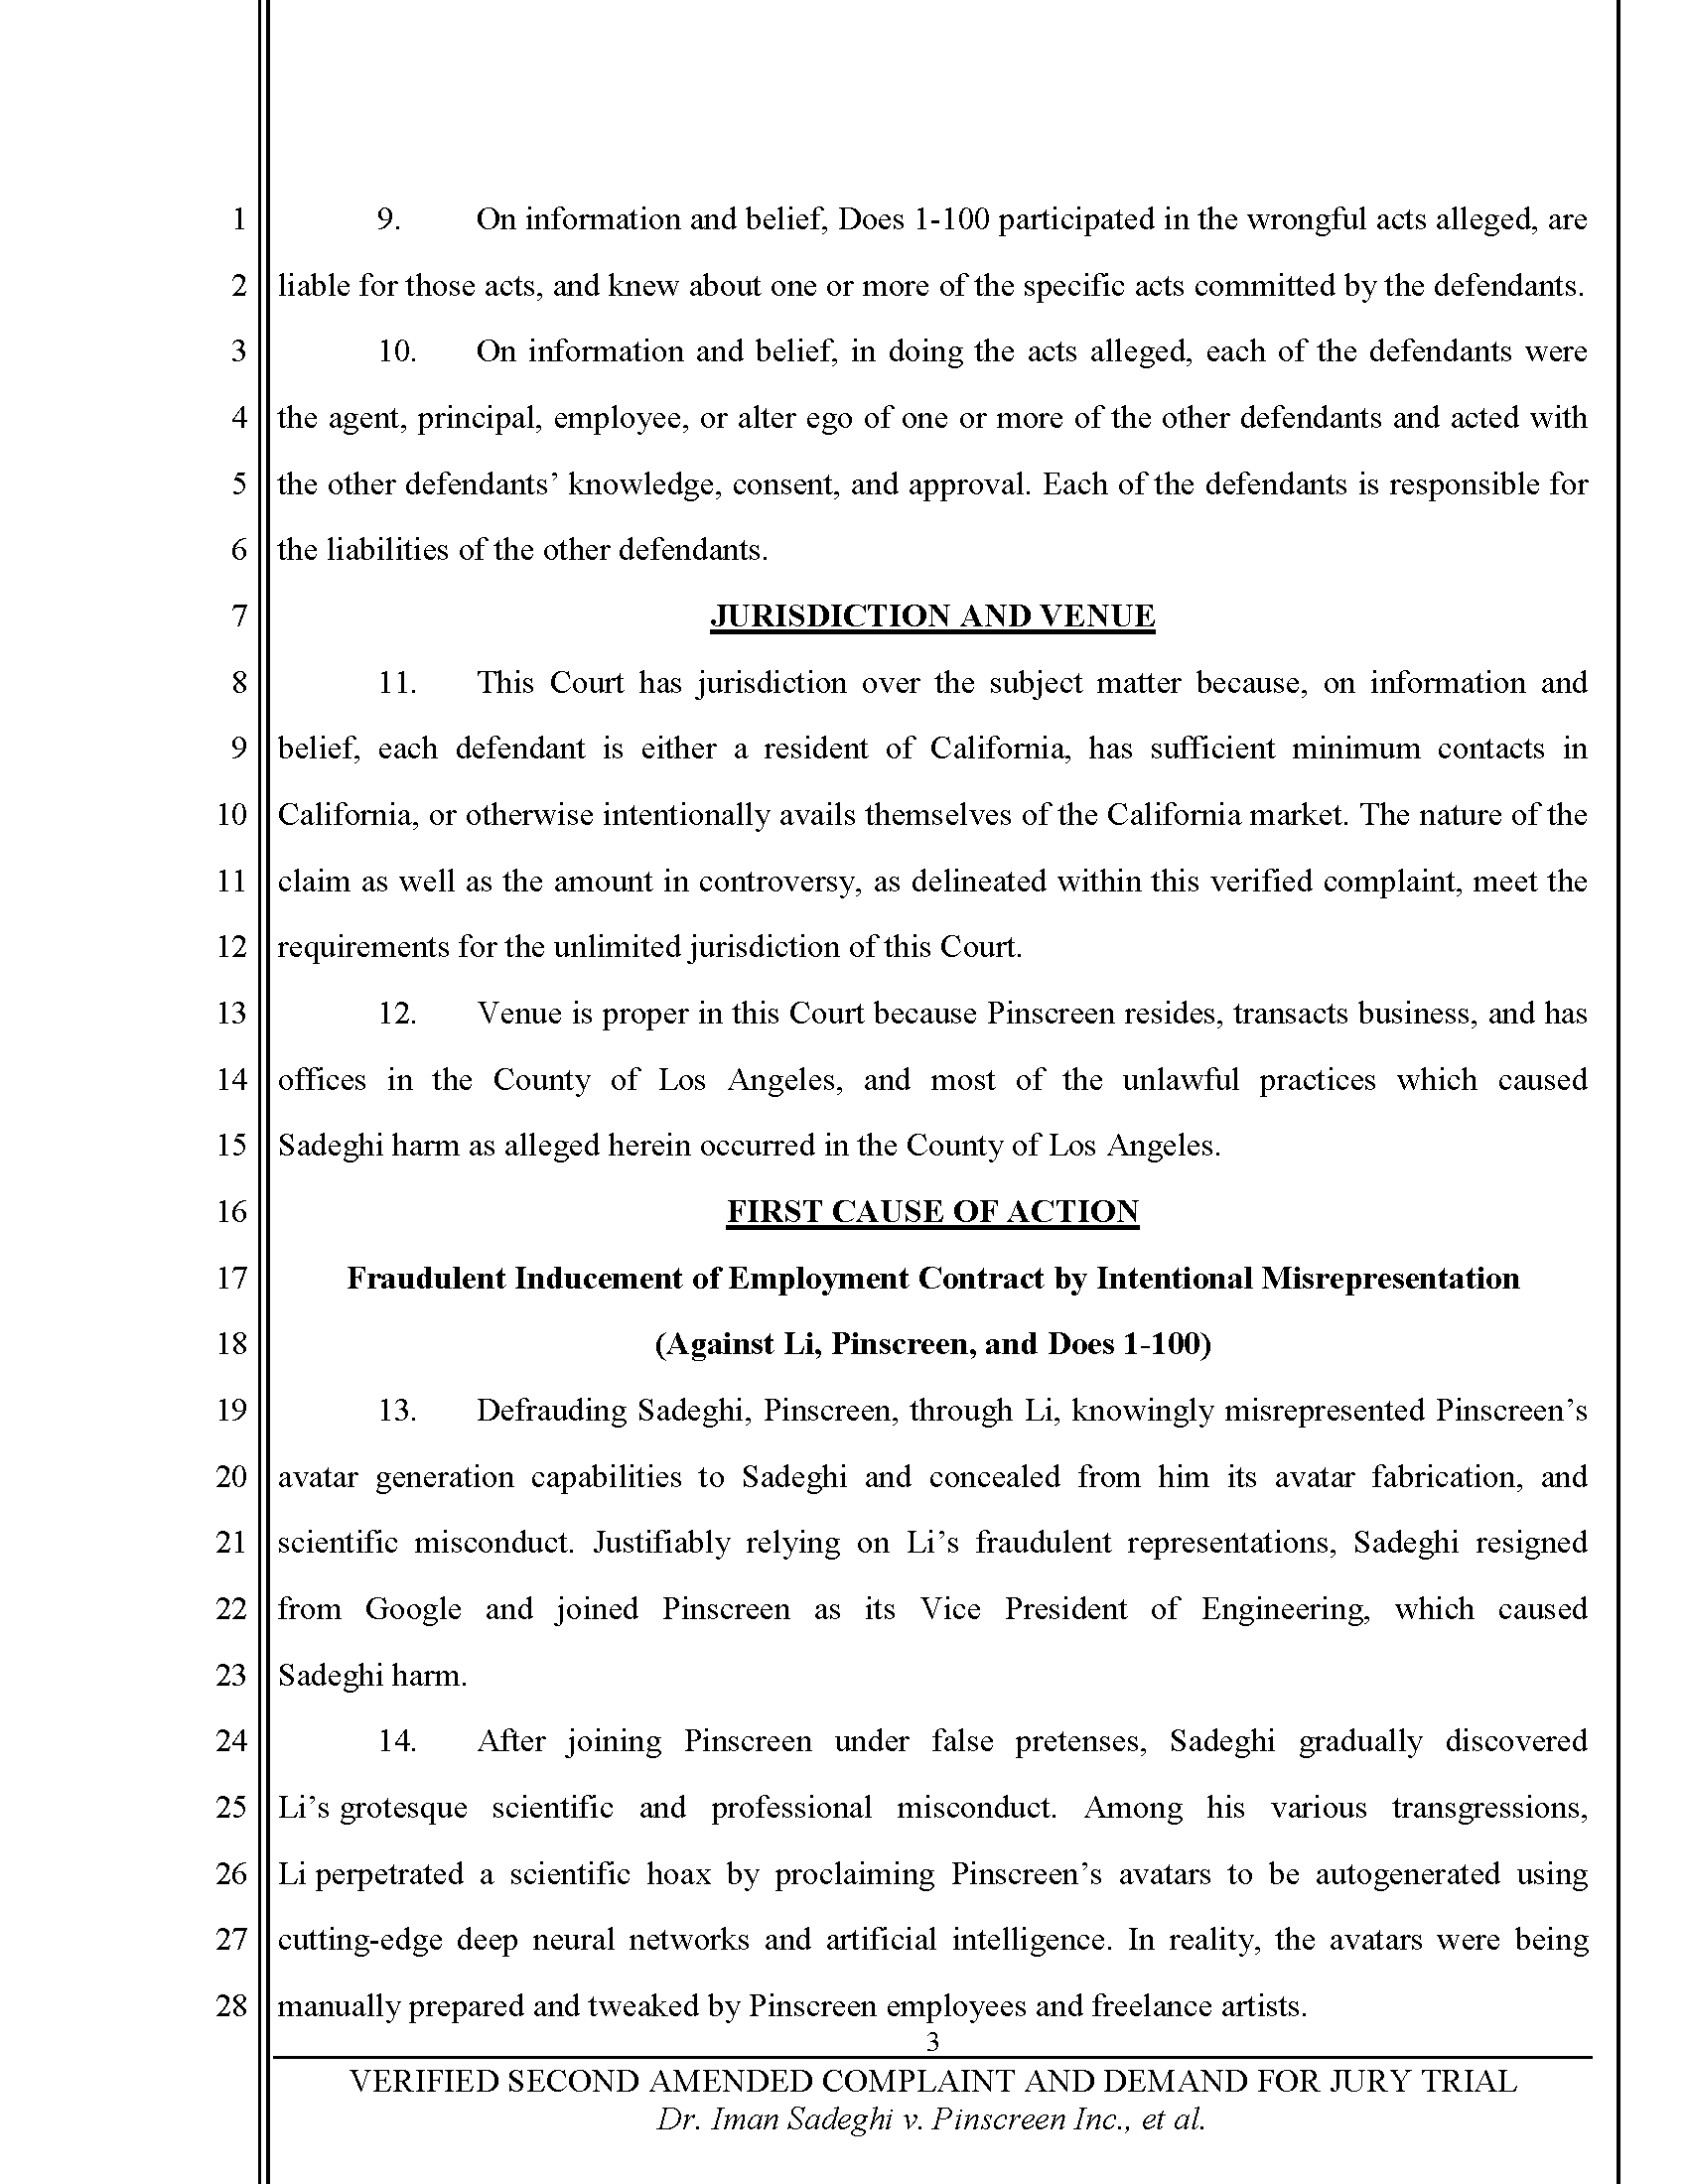 Second Amended Complaint (SAC) Page 4